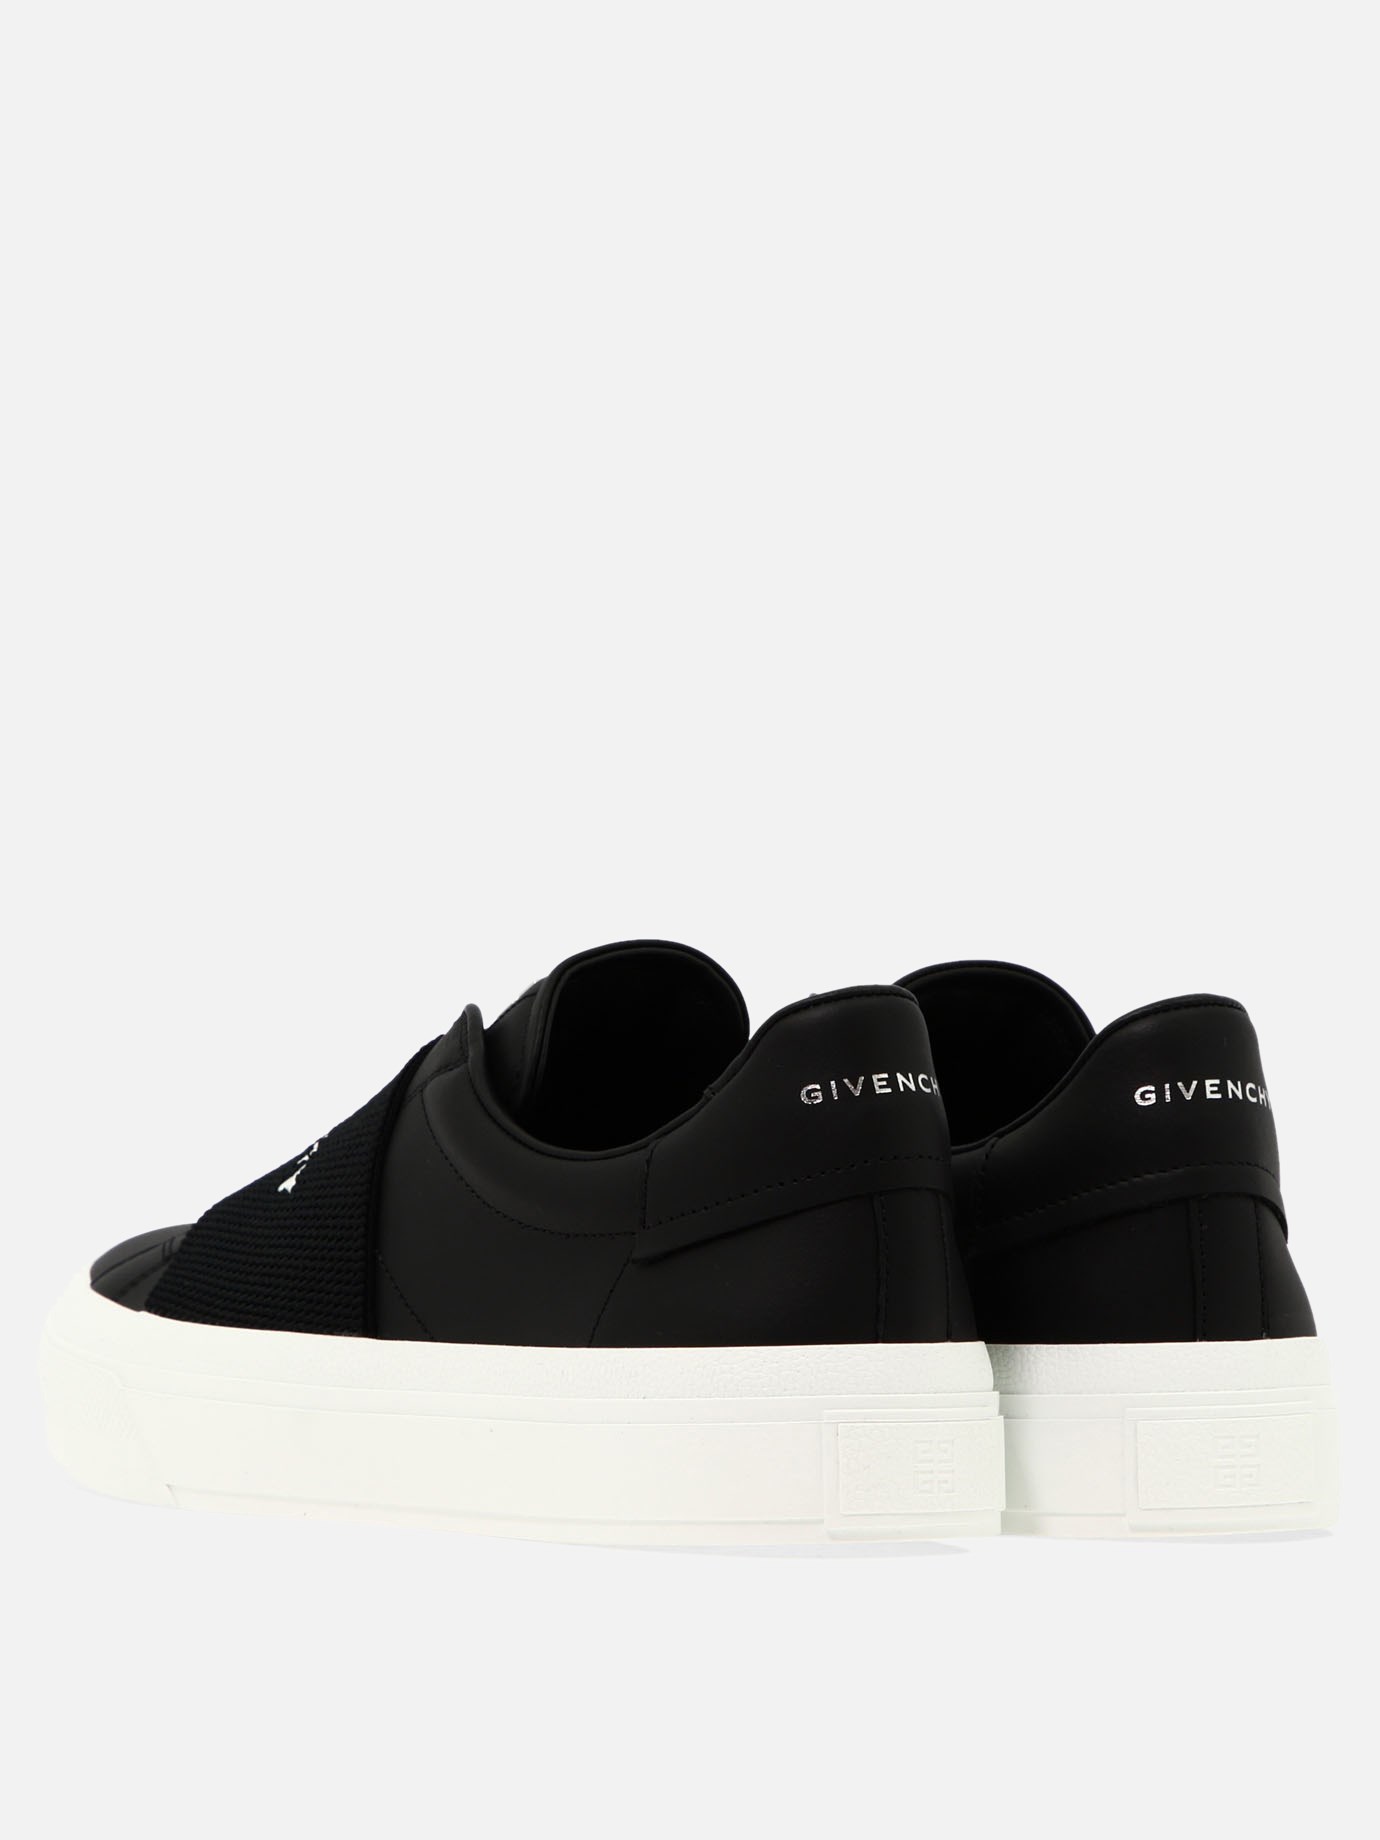  New City  sneakers by Givenchy